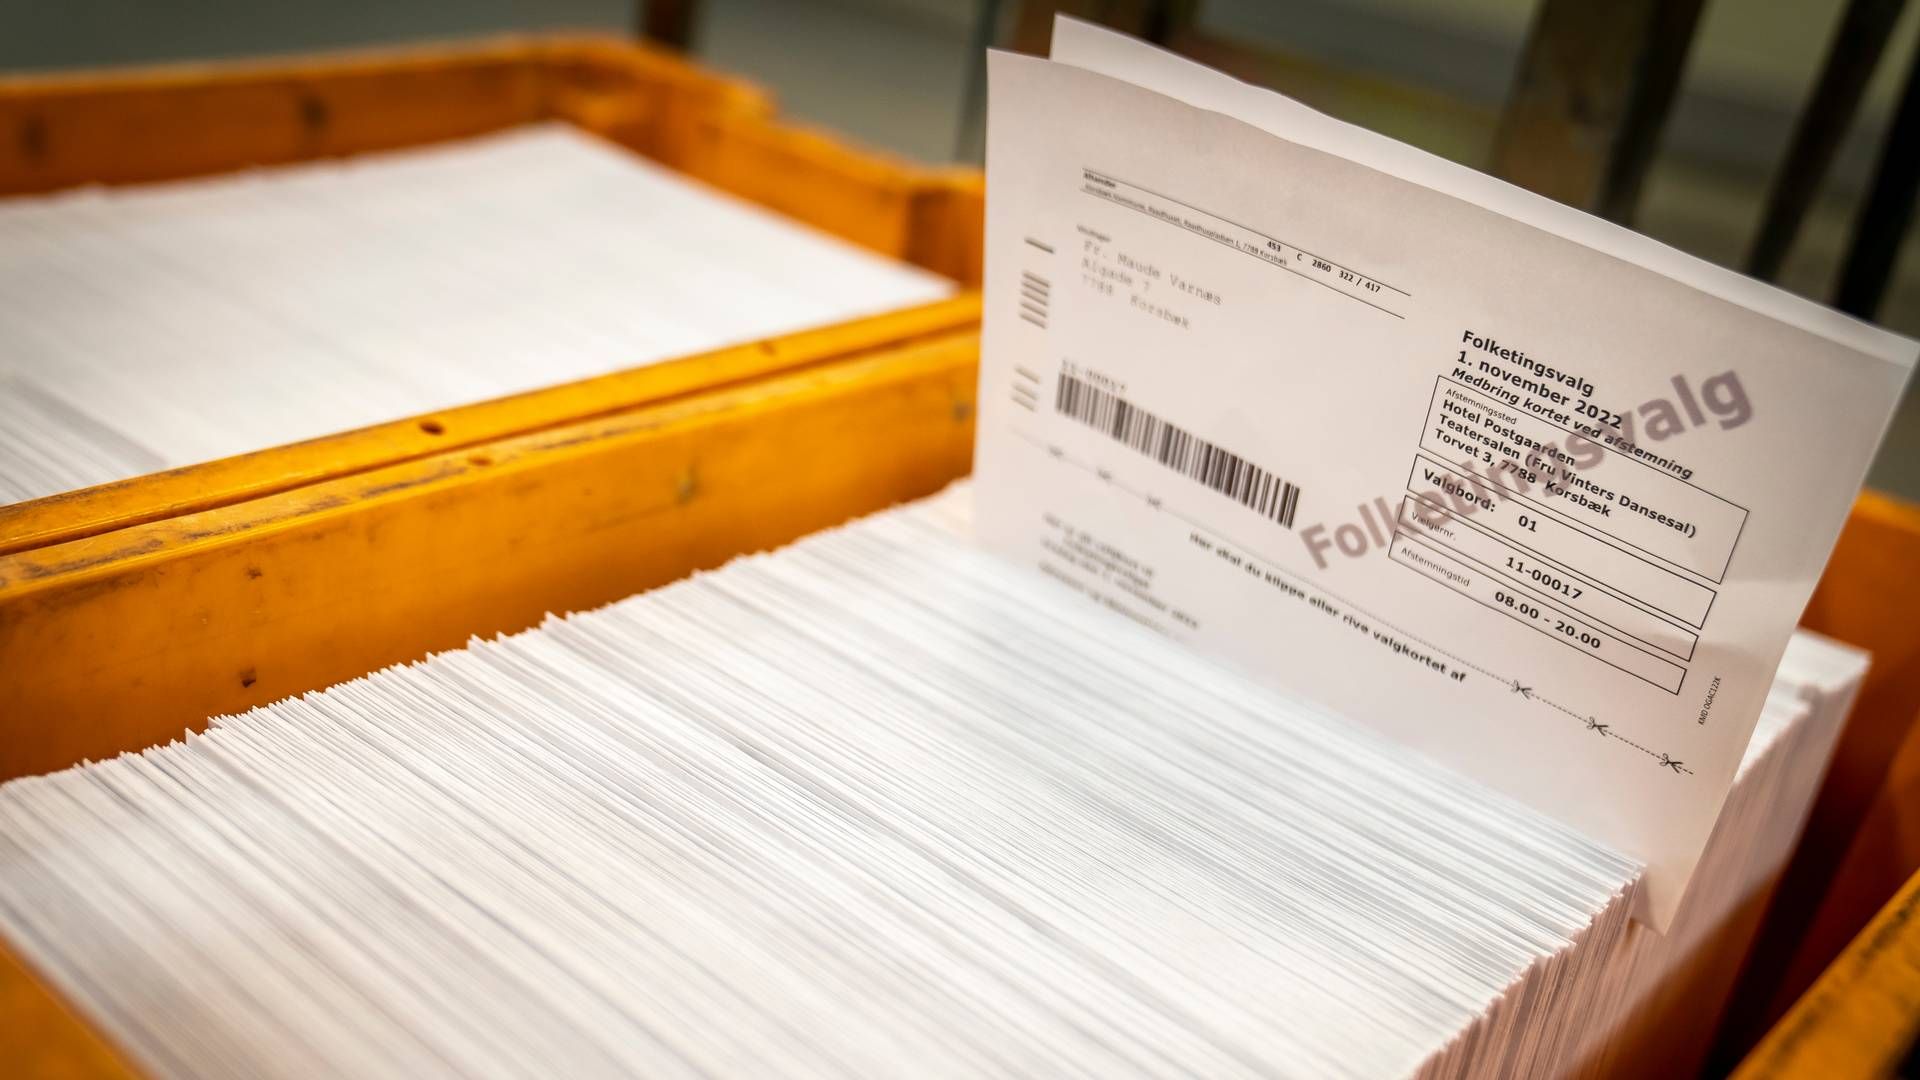 Voting slips for the election, which will be held on Nov 1. | Photo: Mads Claus Rasmussen/Ritzau Scanpix